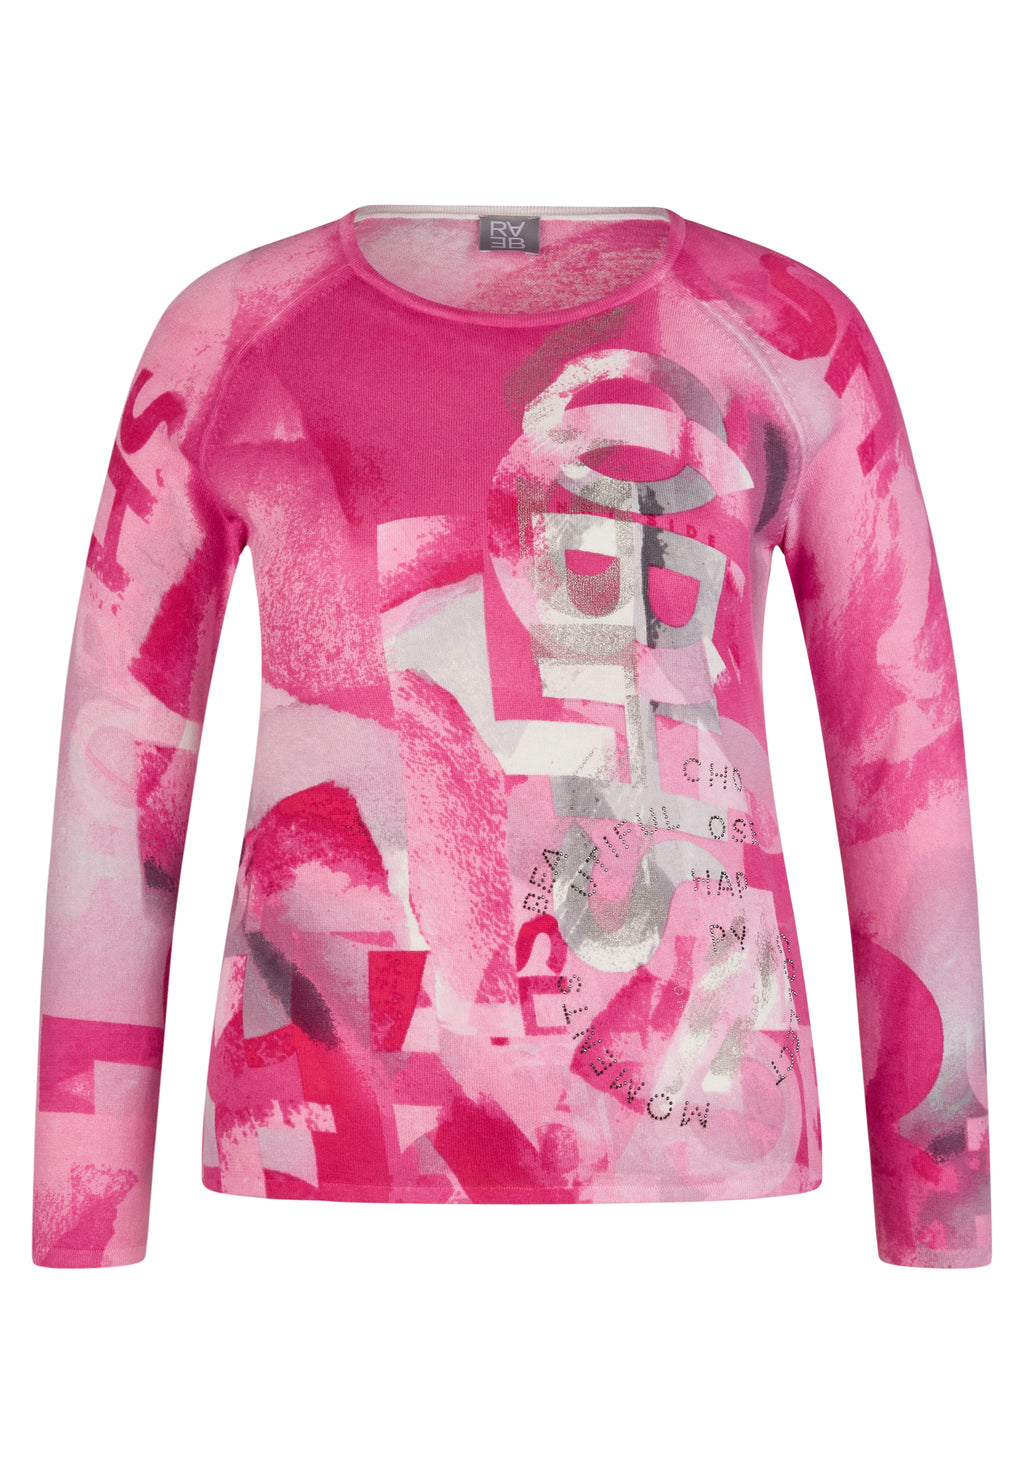 Rabe magnolia park collection printed light knit jumper in pink, product code 52-213600